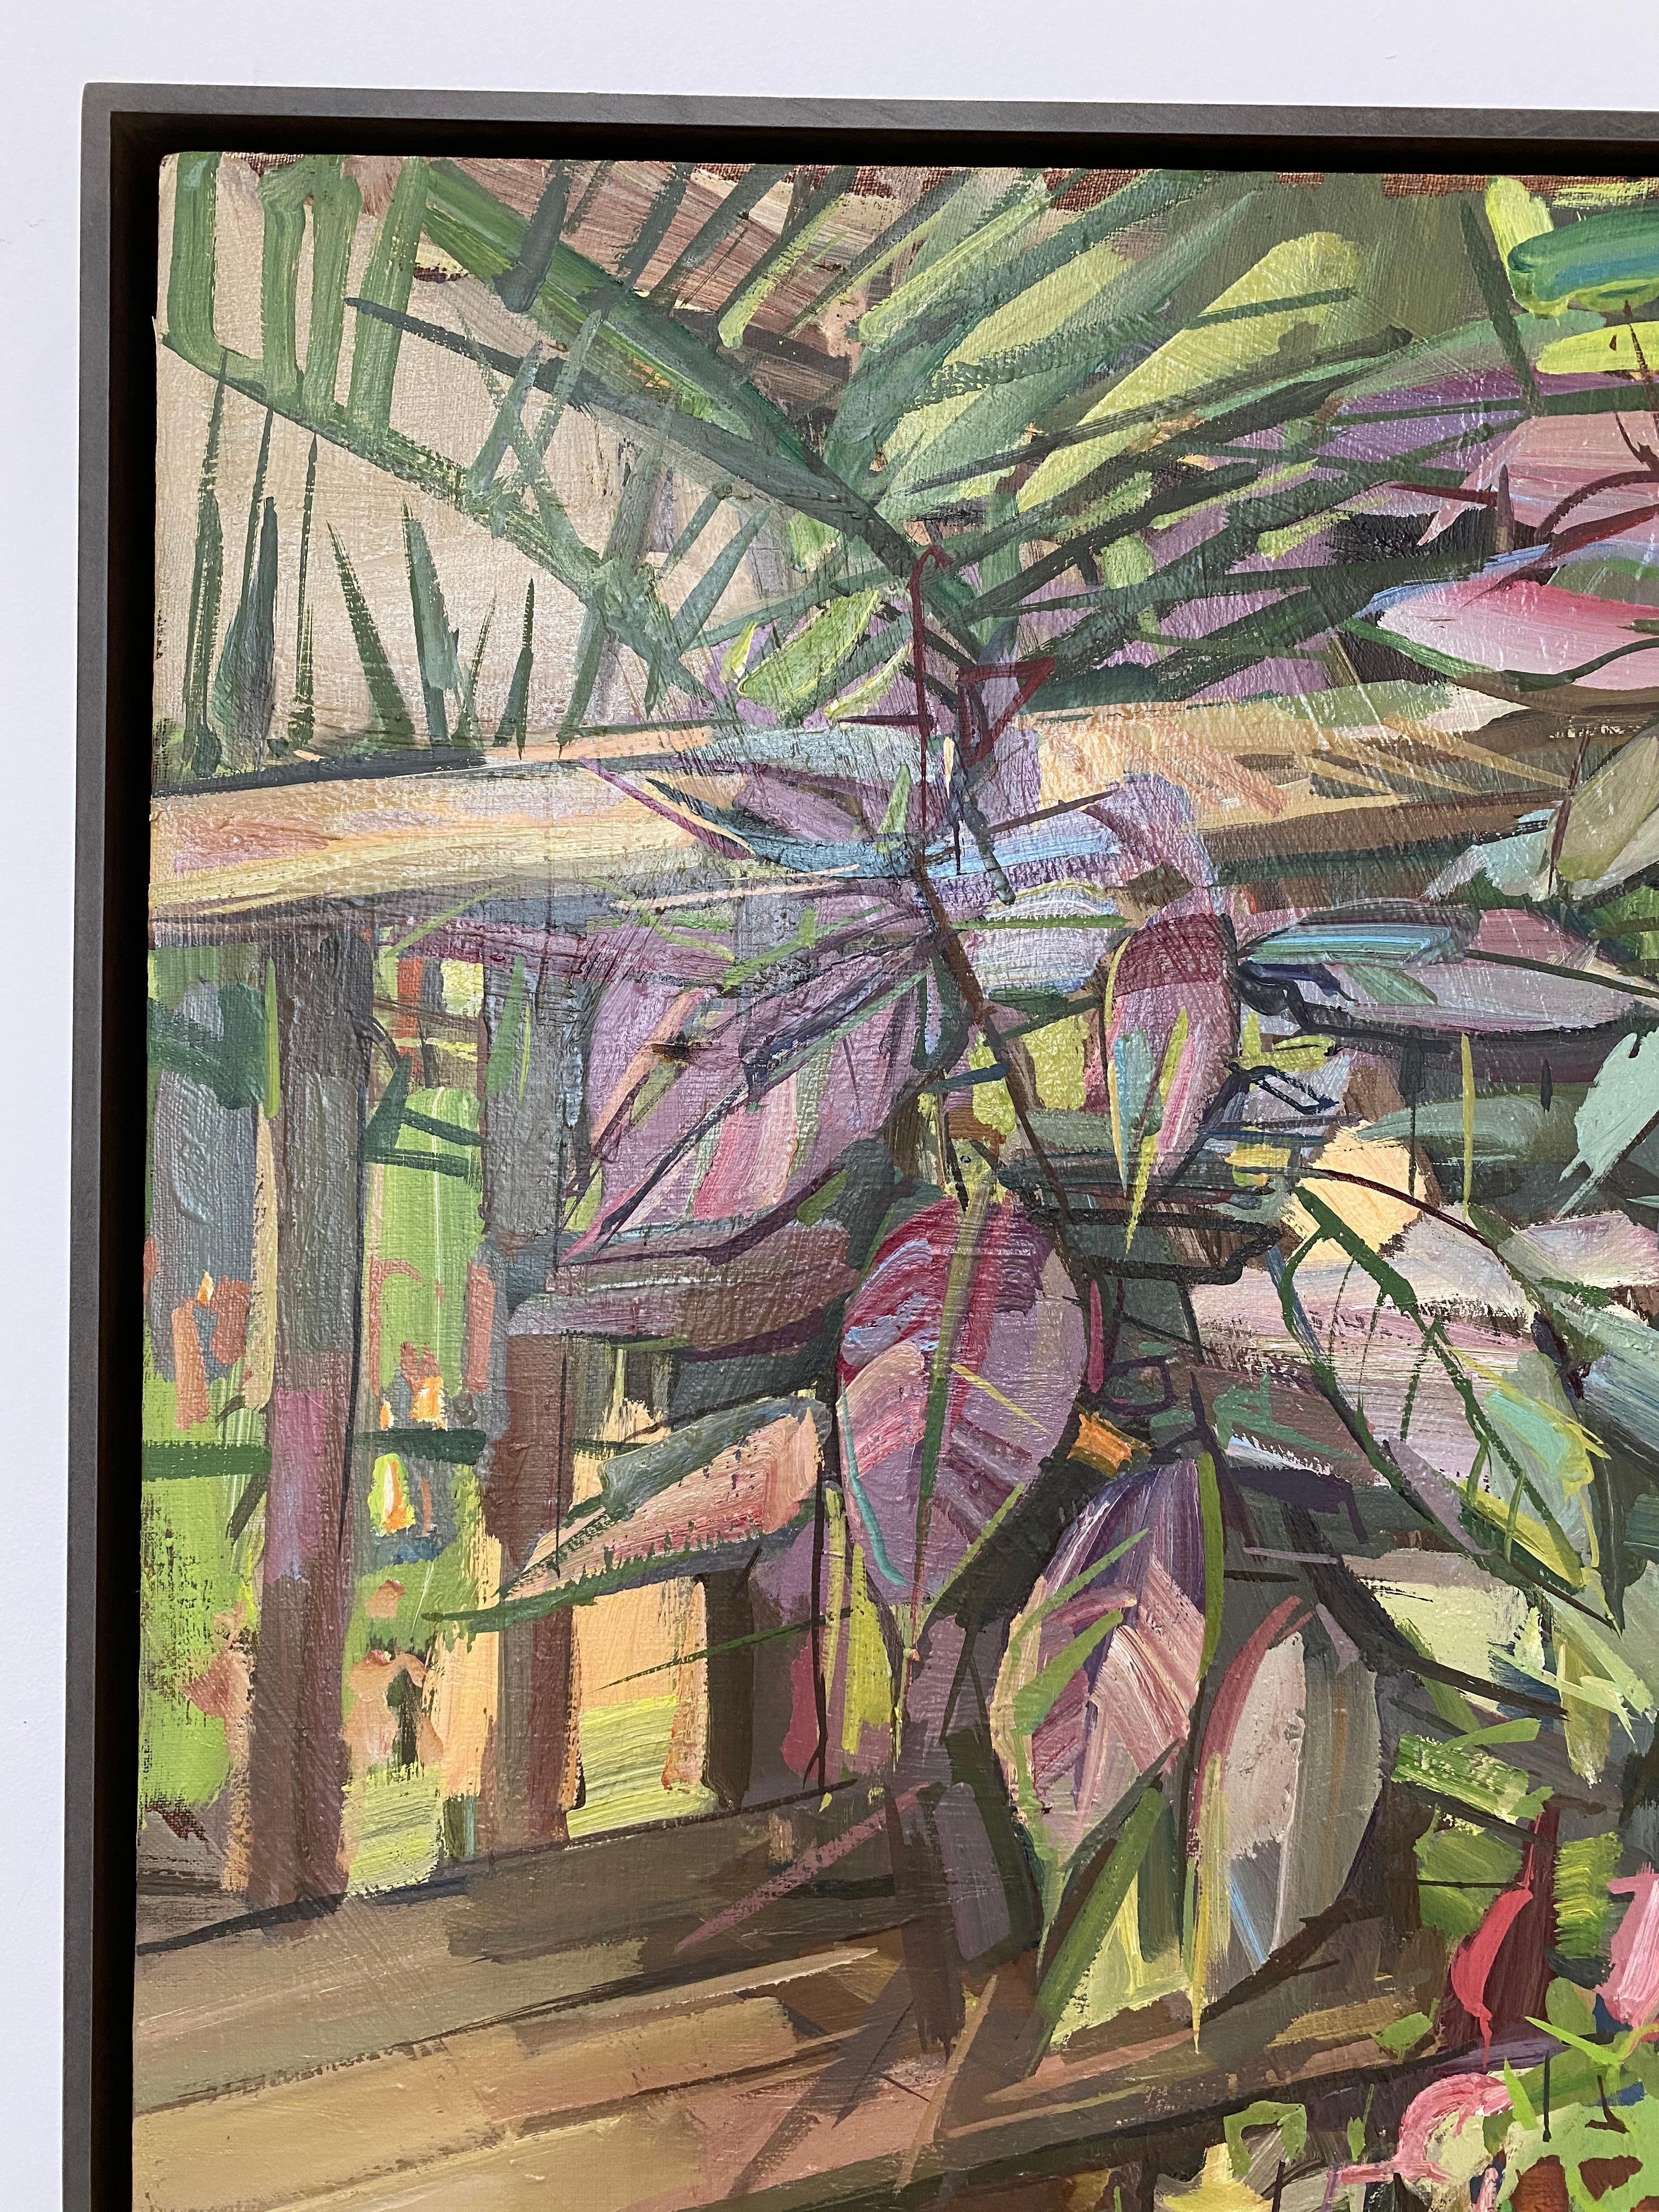 This painting of plants on a porch is from Francis Sills' 2017 series of Flora Paintings. The verdant shades of green in the leaves are accented by rich brown and purple hues and a bright teal planter. Signed on recto and verso. Framed in thin, dark